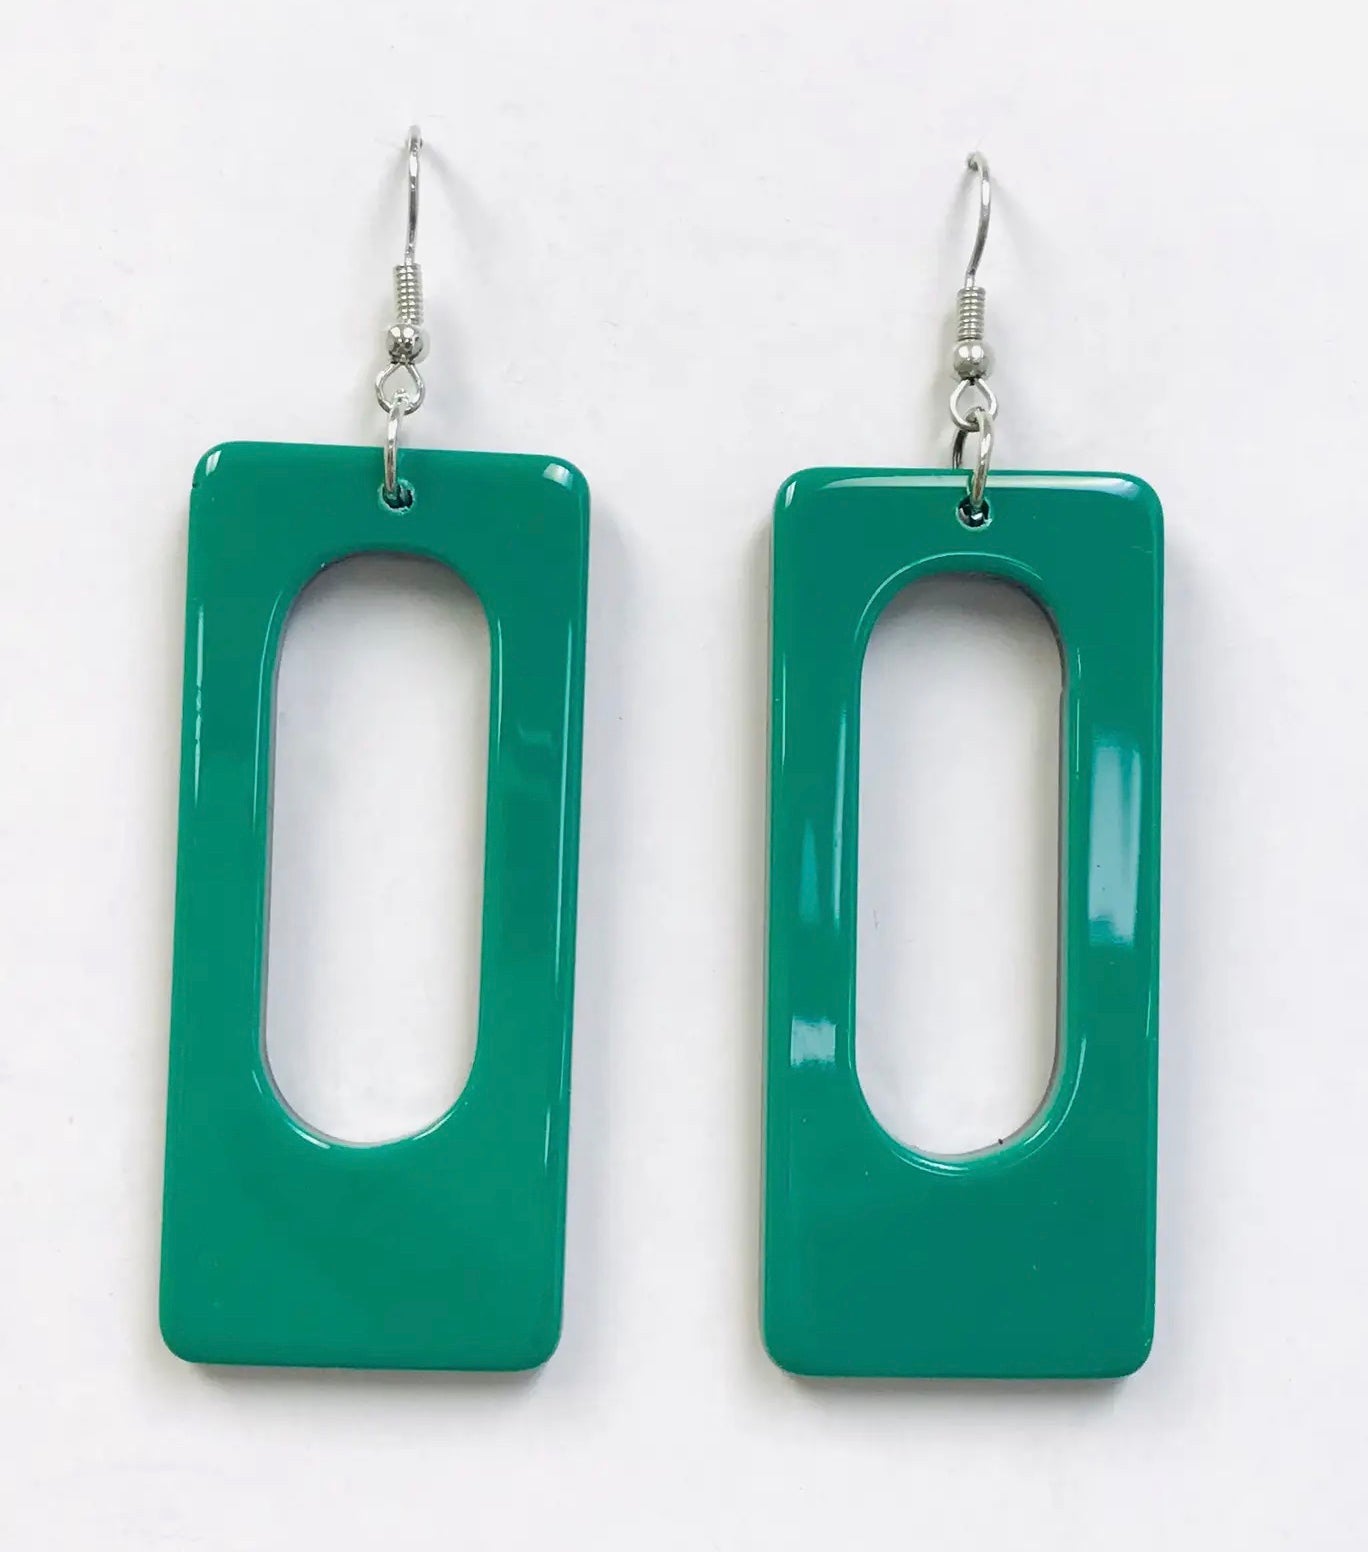 A pair of rectangular acrylic dangle earrings with rounded corners and an oblong hole in the middle. The front of the earring is a rich green color with black on the back 